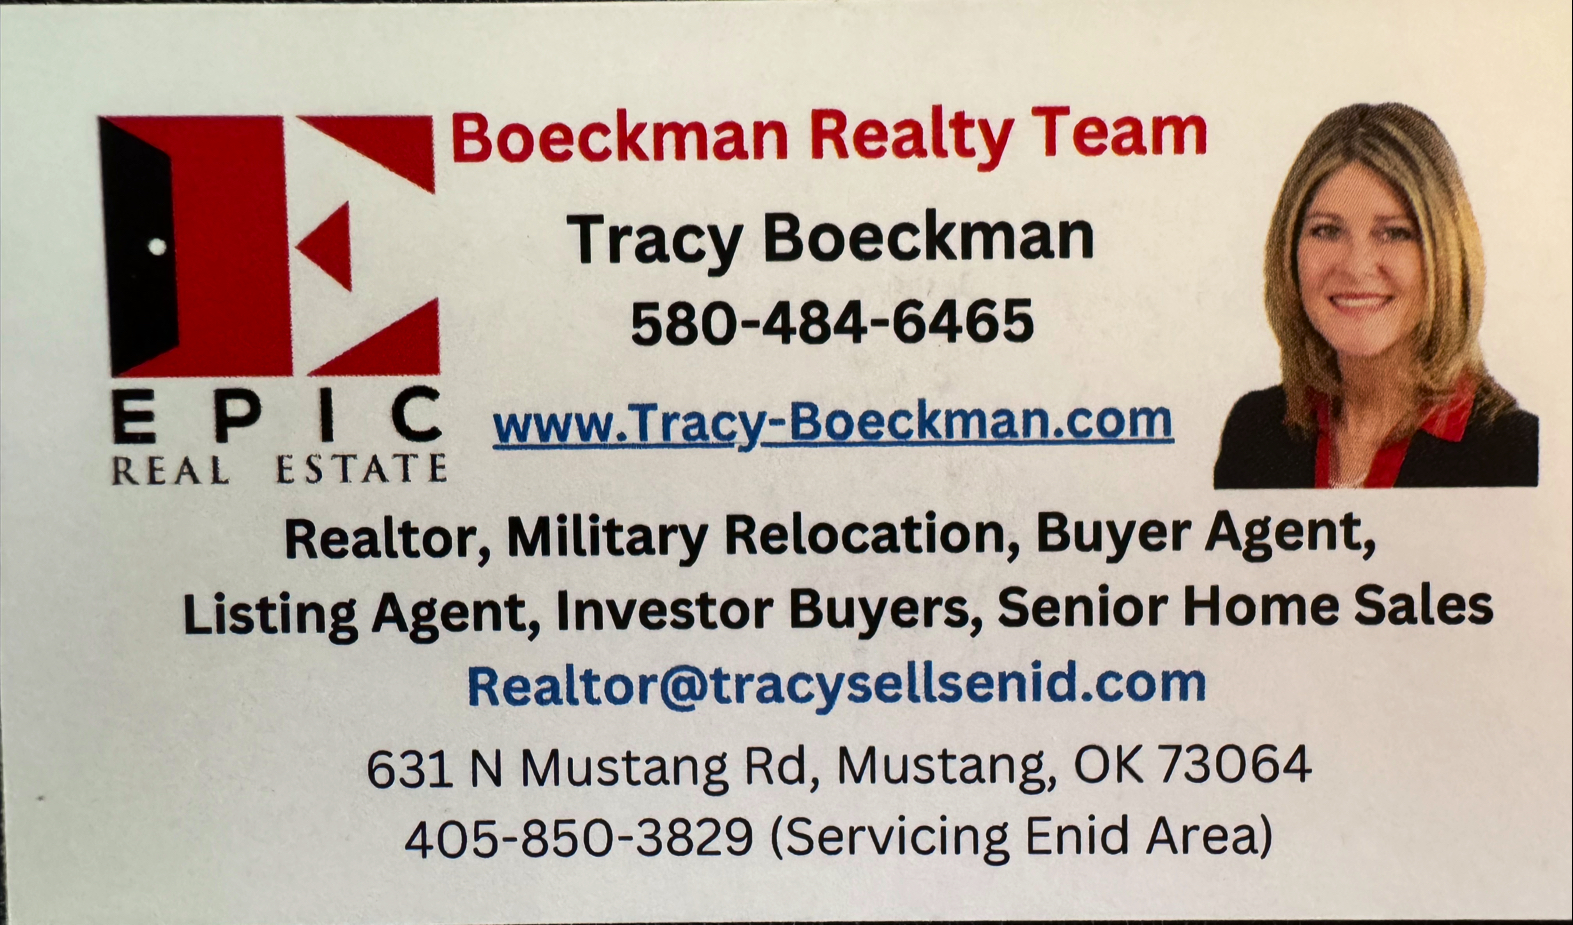 Boeckman Realty Team, Tracy Boeckman, of EPIC Real Estate